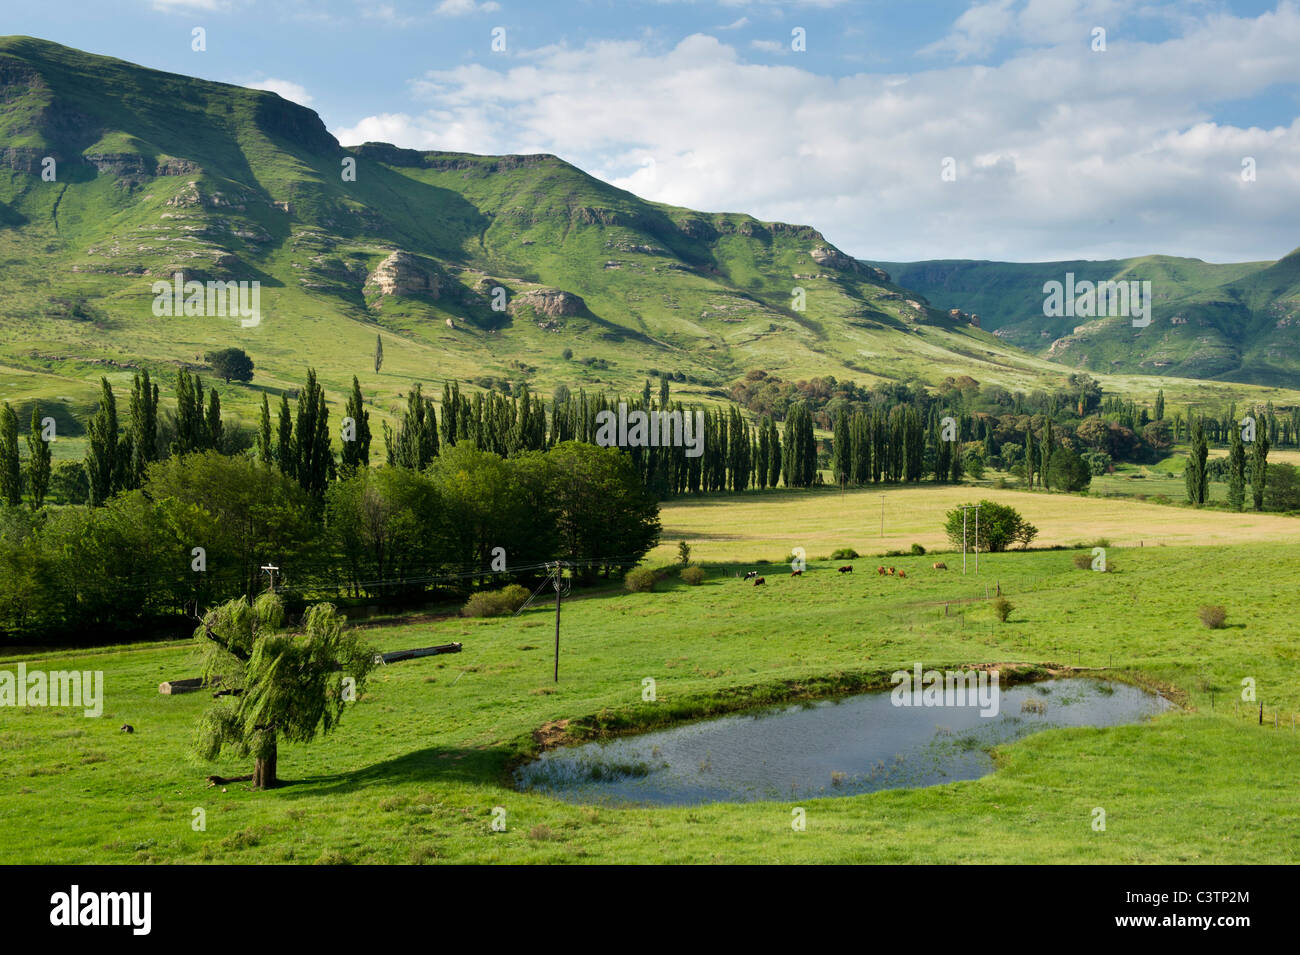 Scenery outside Clarens, Free State, South Africa Stock Photo